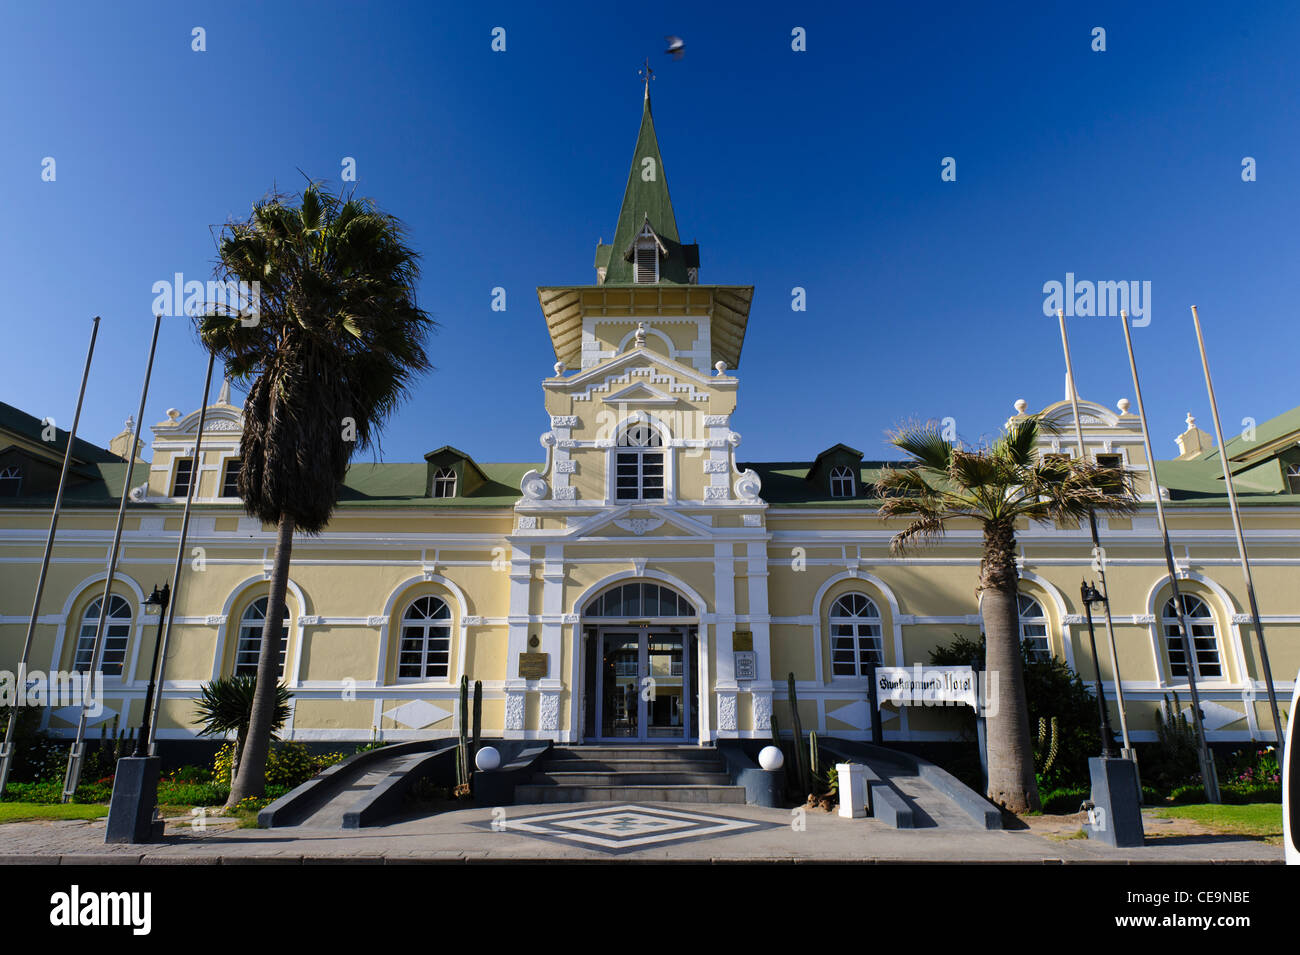 Former station building now serving as a hotel. Swakopmund, Namibia. Stock Photo